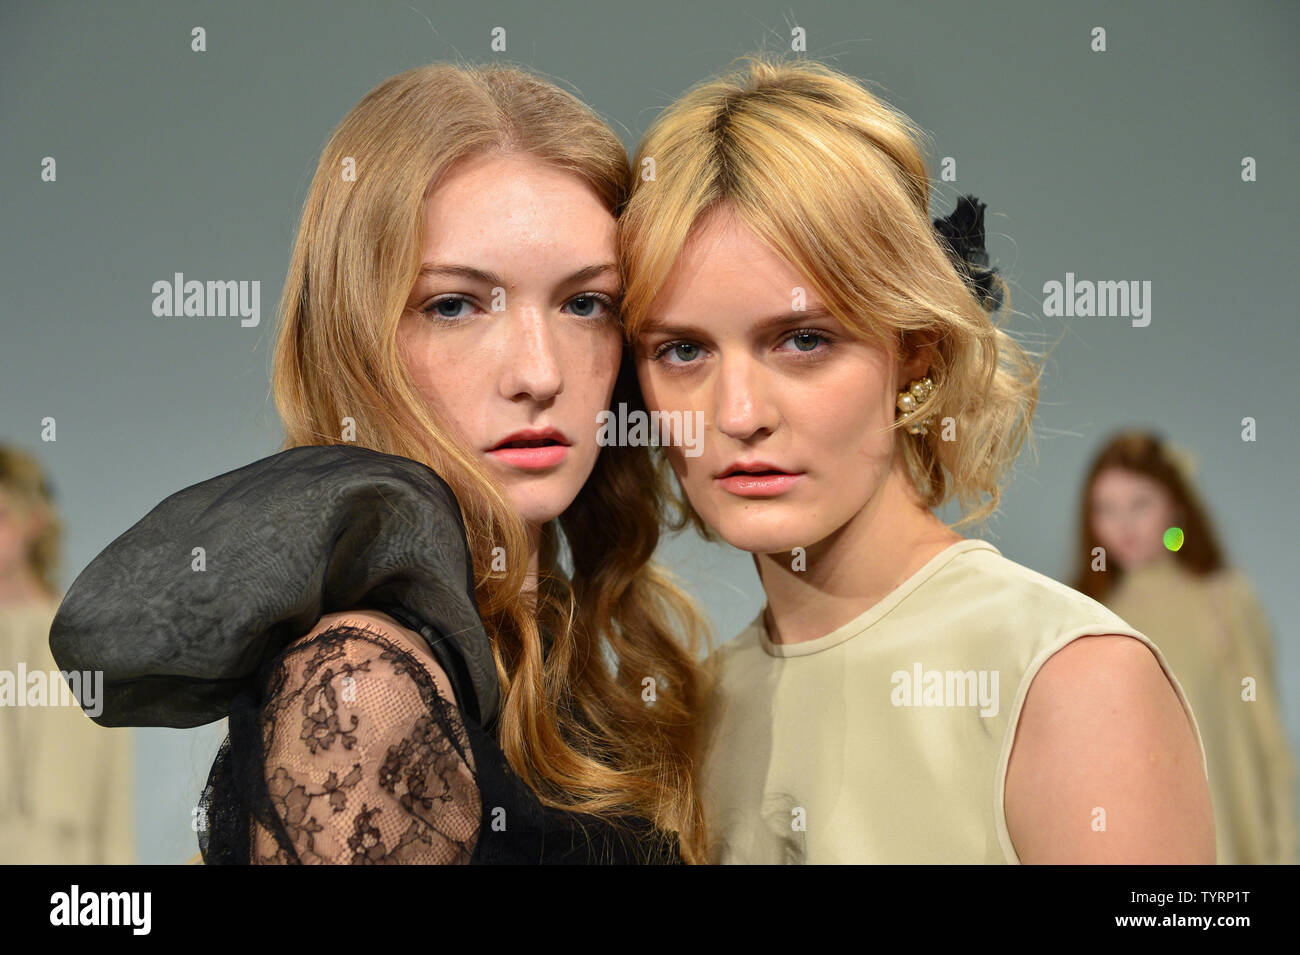 Models pose at the Memere presentation at New York Fashion Week: Pier 59 Studios on February 13, 2017 in New York City.    Photo by Andrea Hanks/UPI Stock Photo